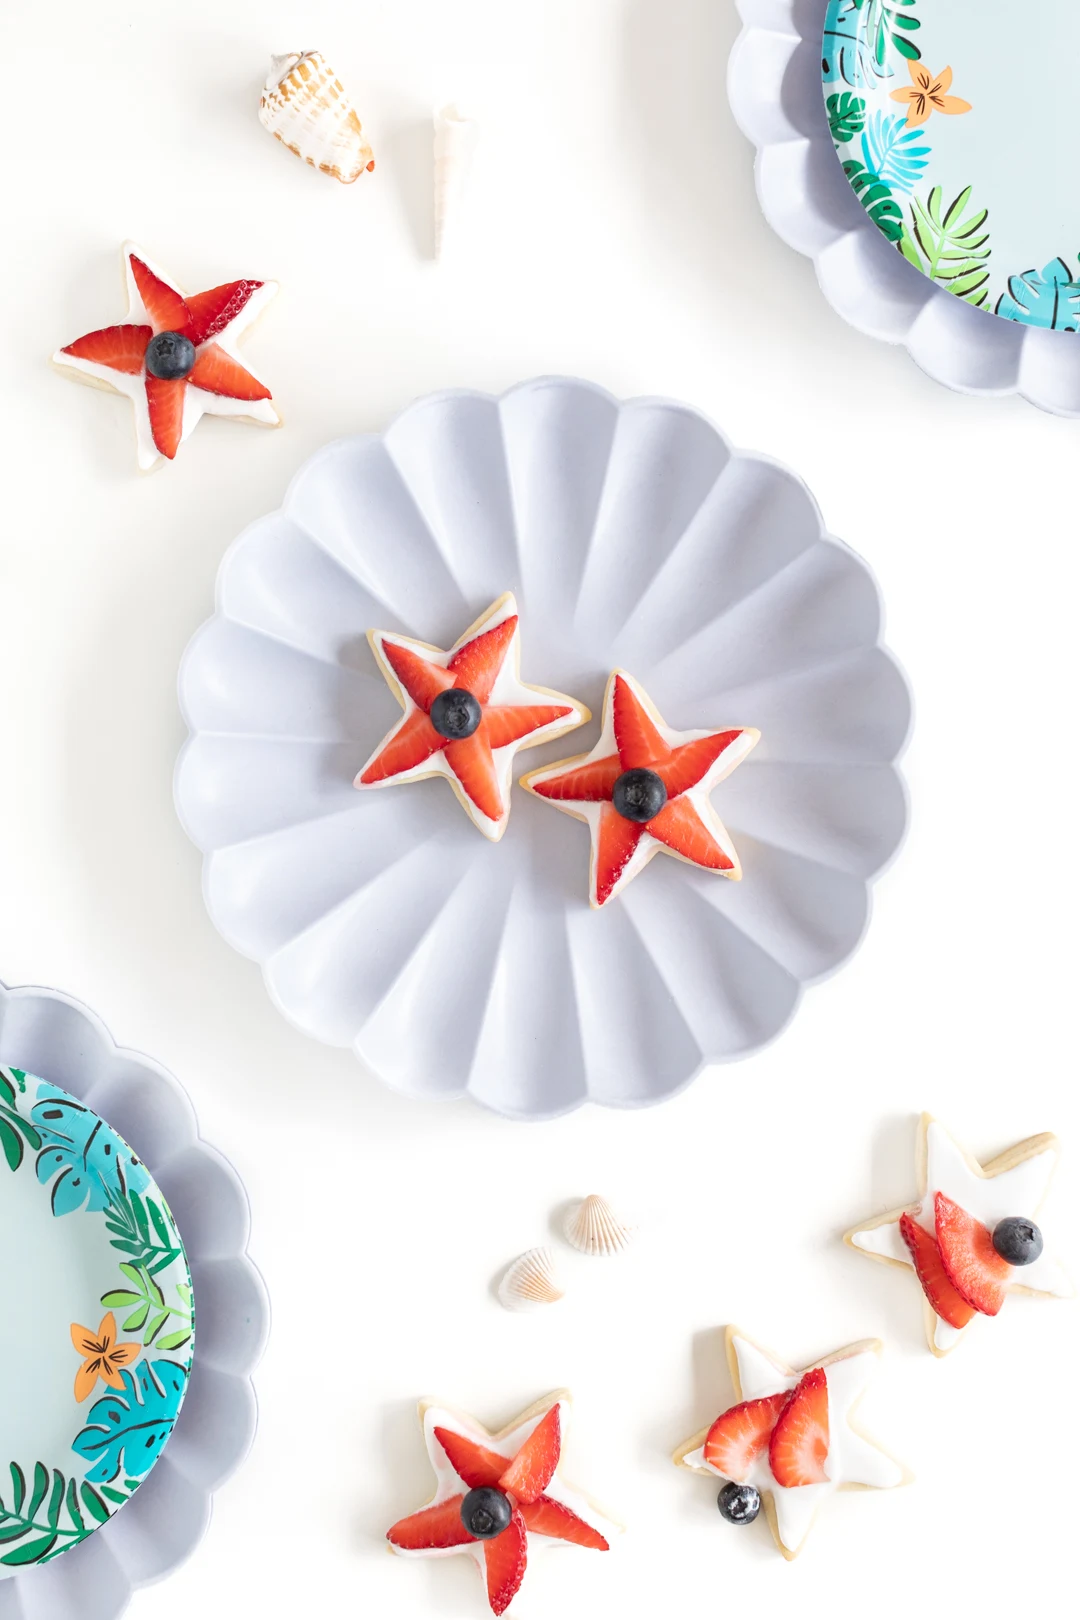 shell plate with two star-shaped strawberry topped sugar cookies